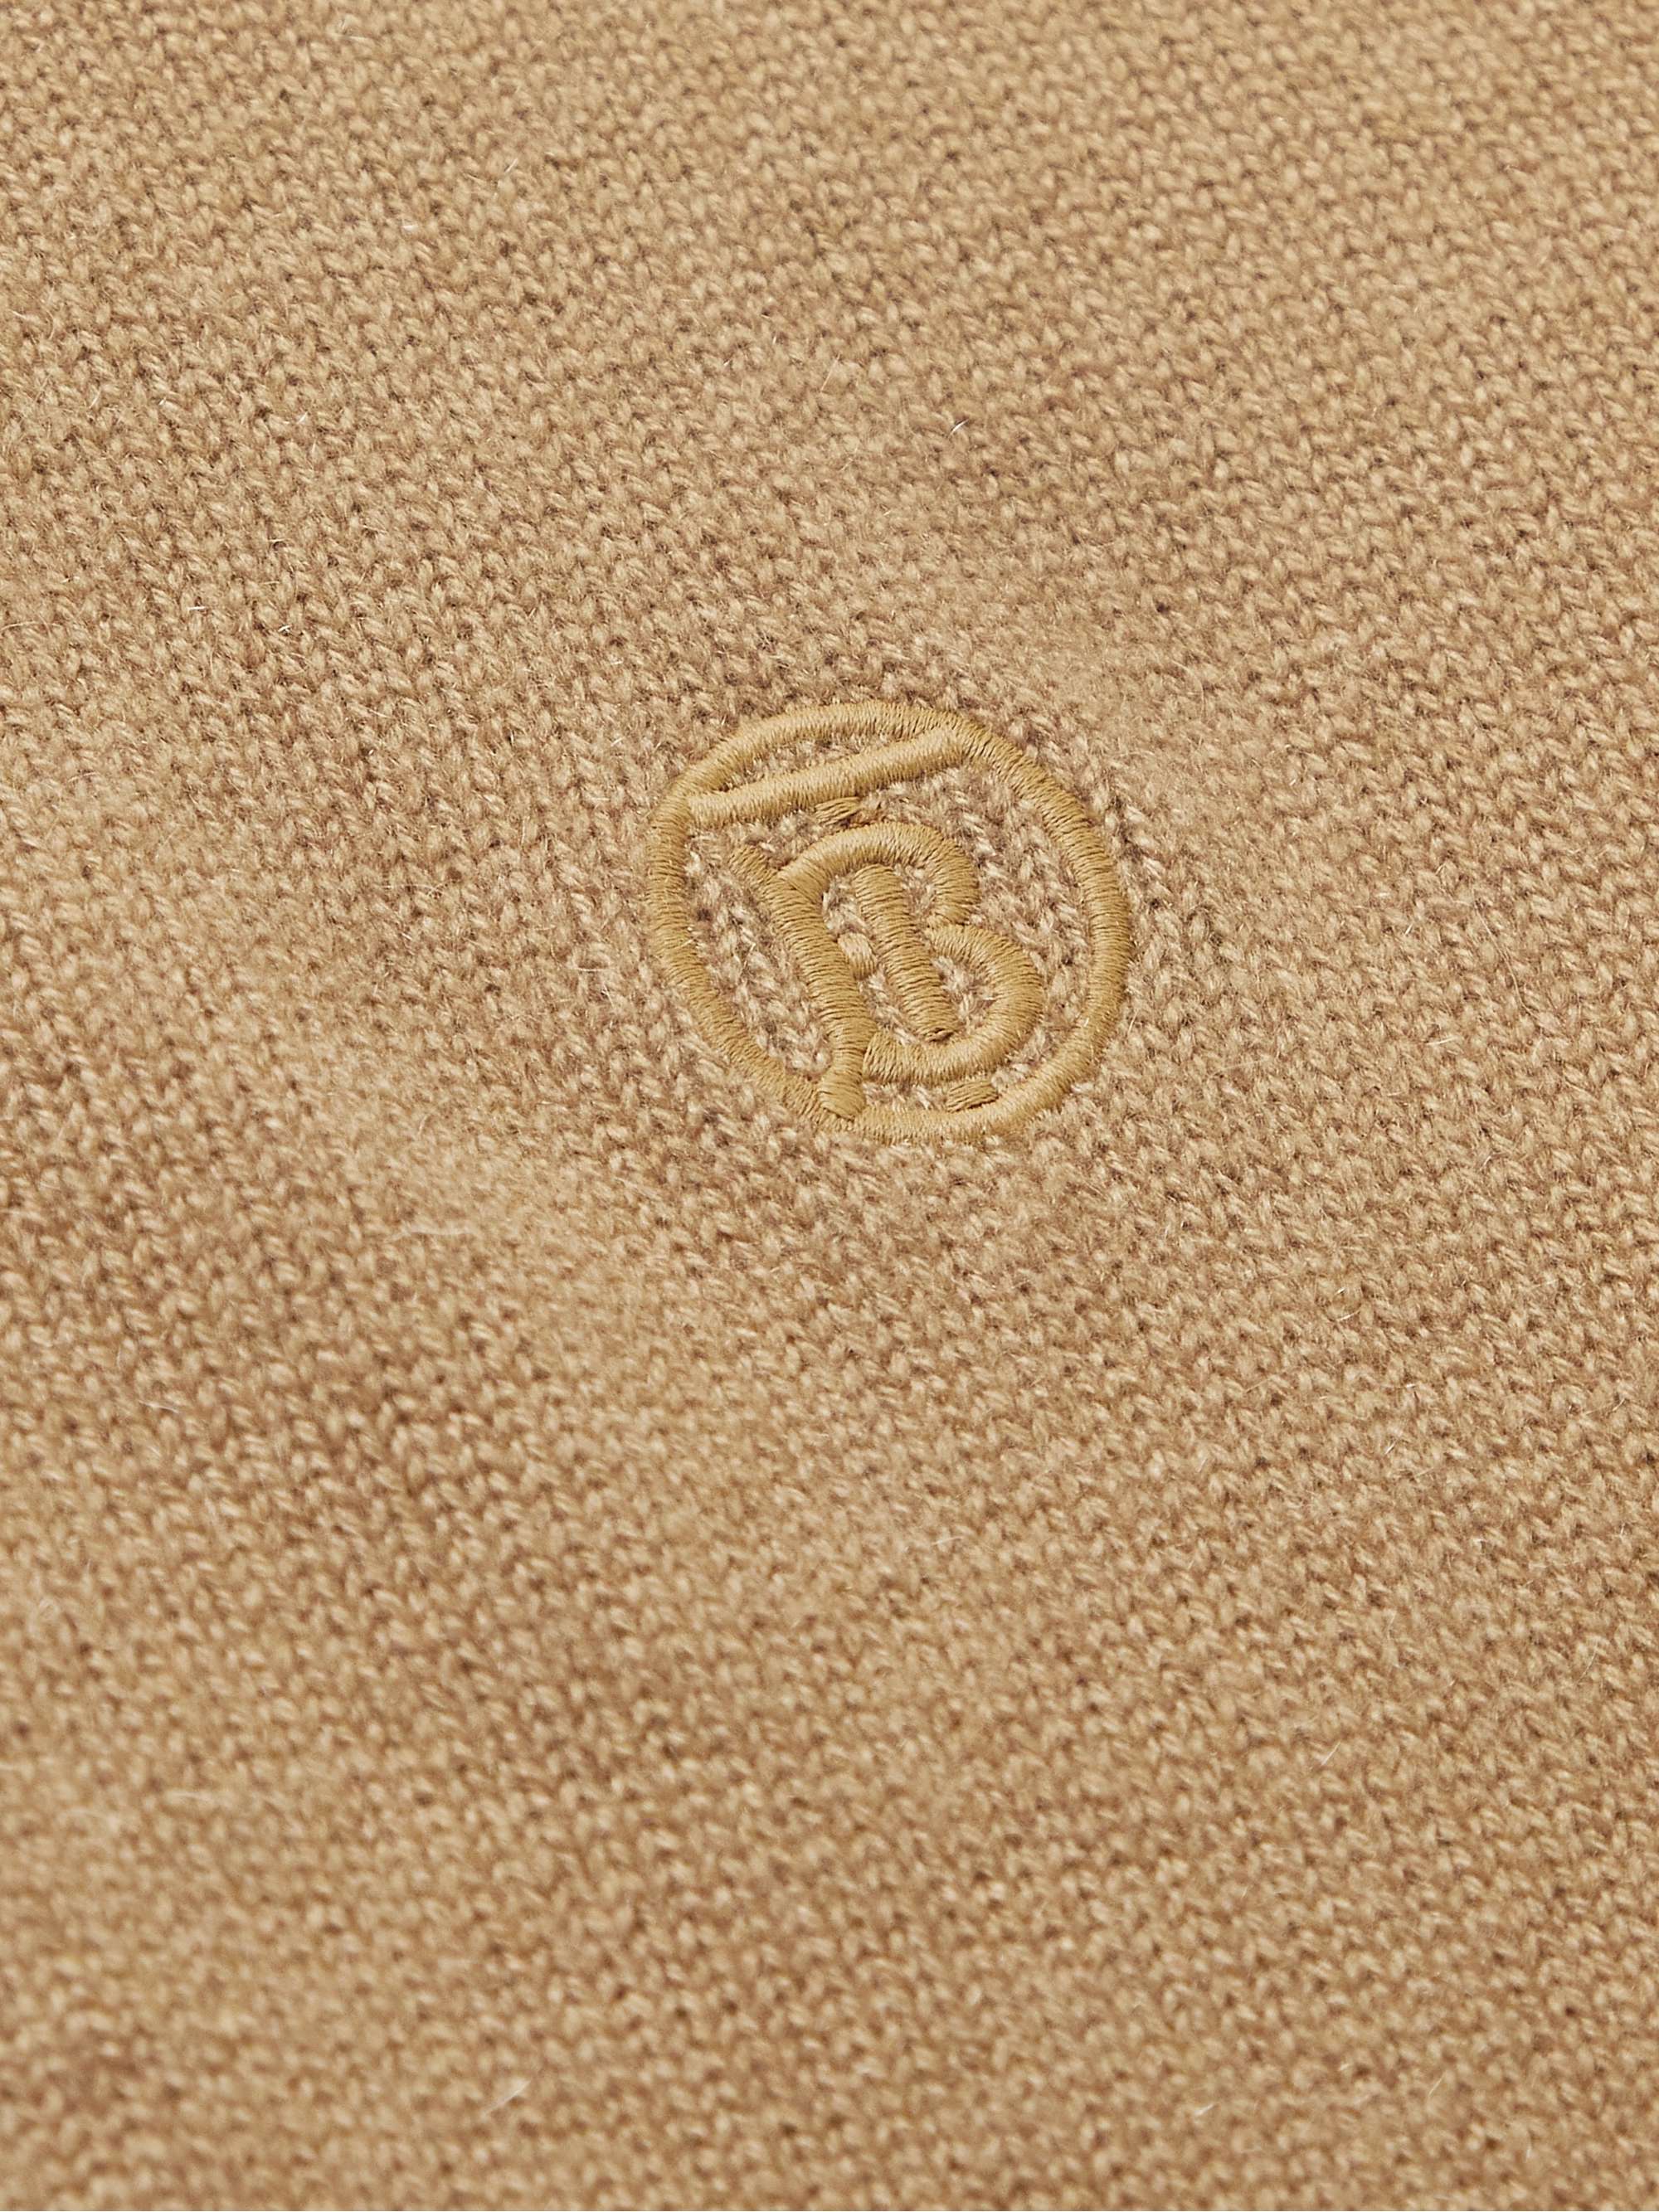 BURBERRY Logo-Embroidered Cashmere Half-Zip Sweater